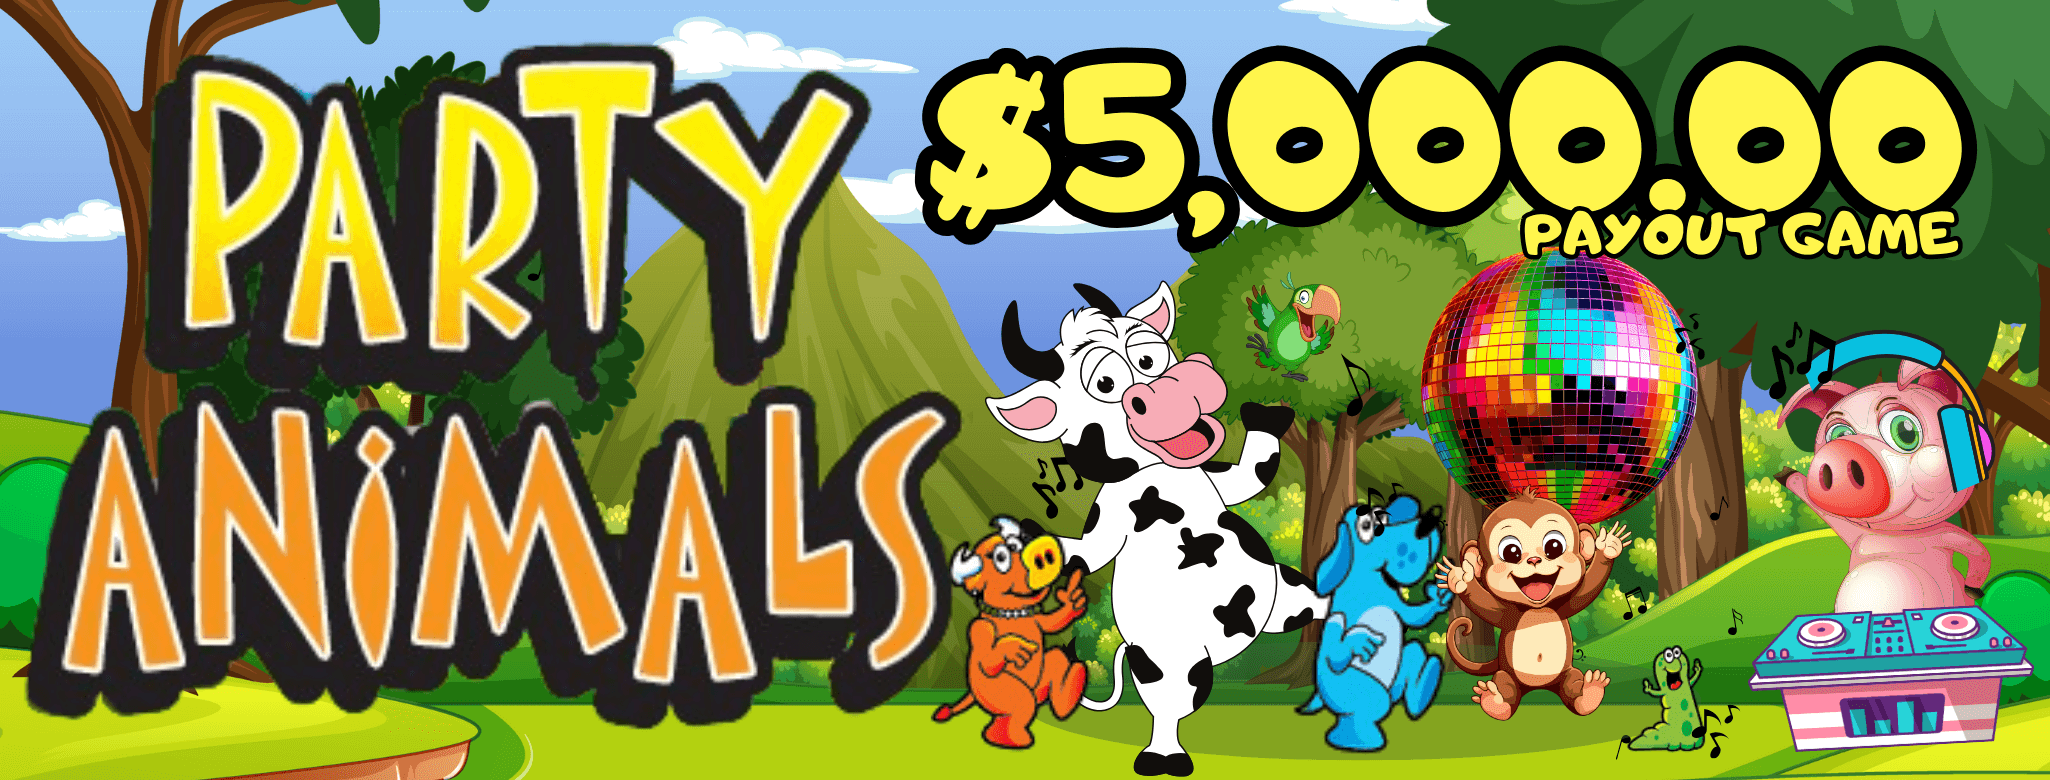 $5,000.00 Party Animals Game